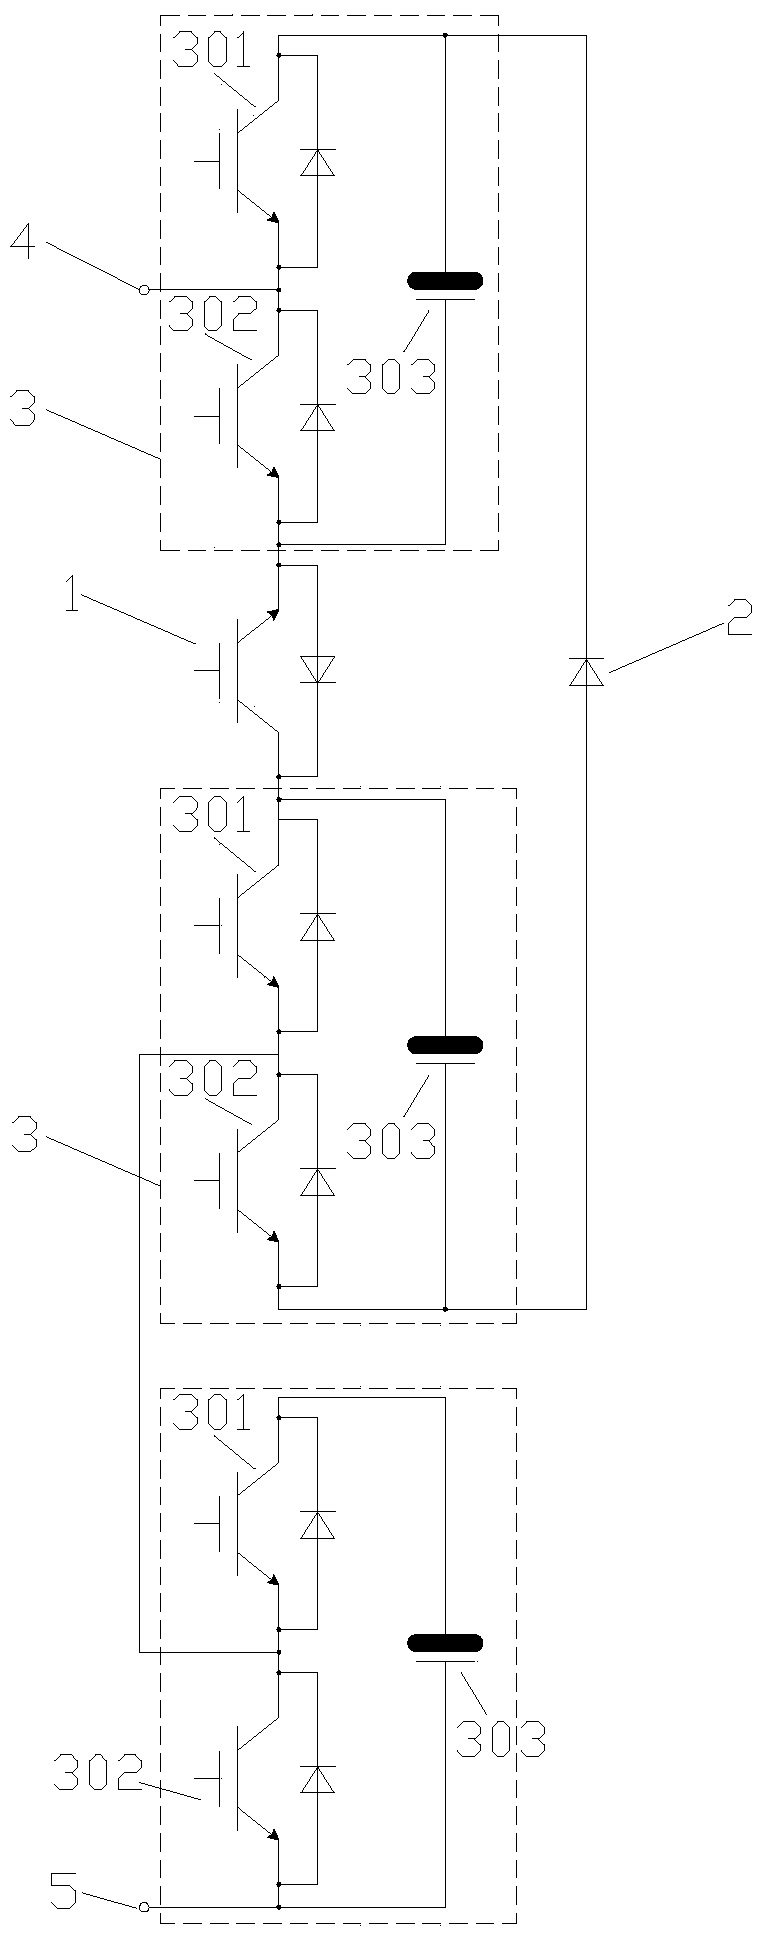 A mmc sub-module circuit with DC side fault blocking capability